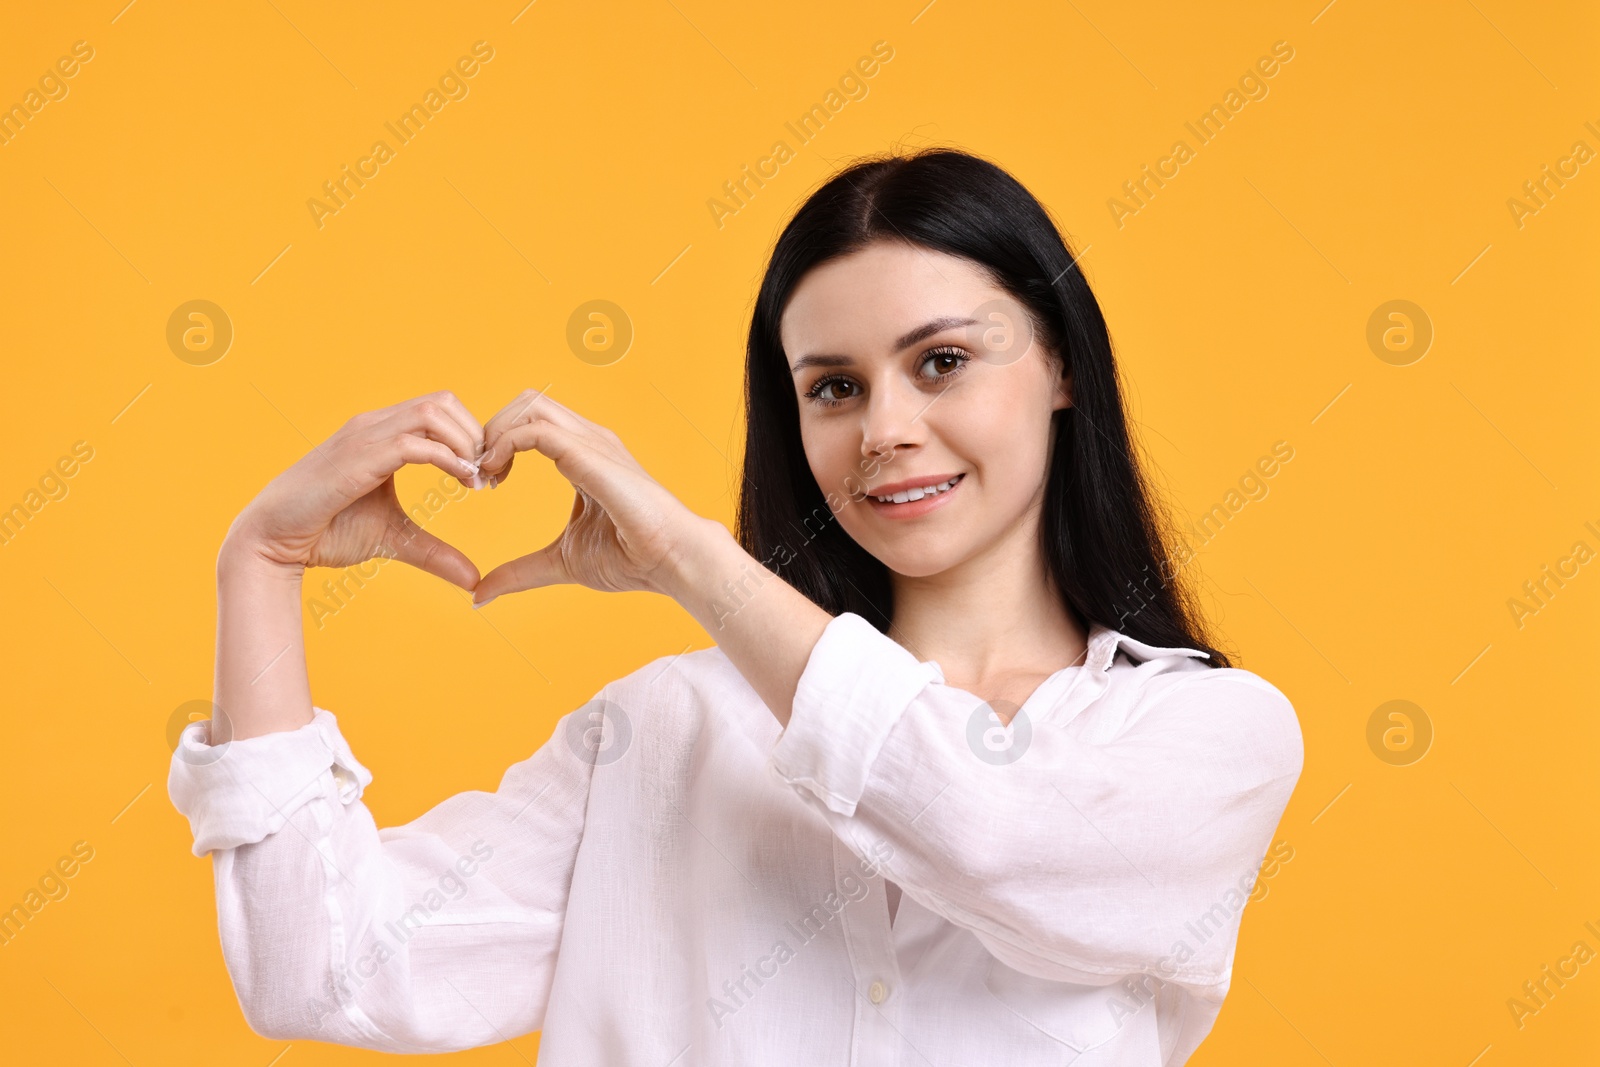 Photo of Smiling woman showing heart gesture with hands on orange background